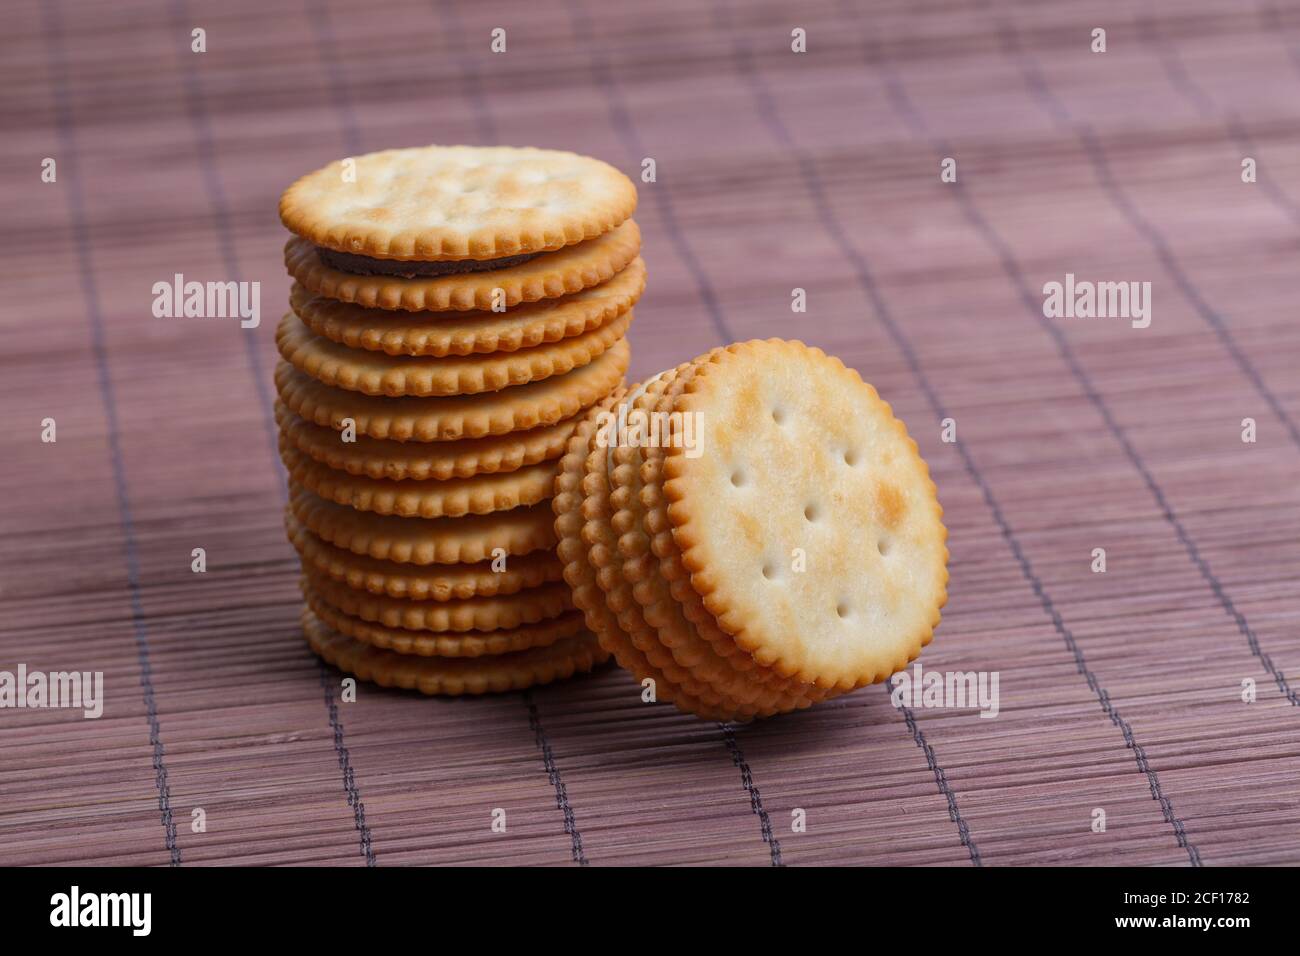 Cream sandwich biscuits on bamboo curtain background Stock Photo